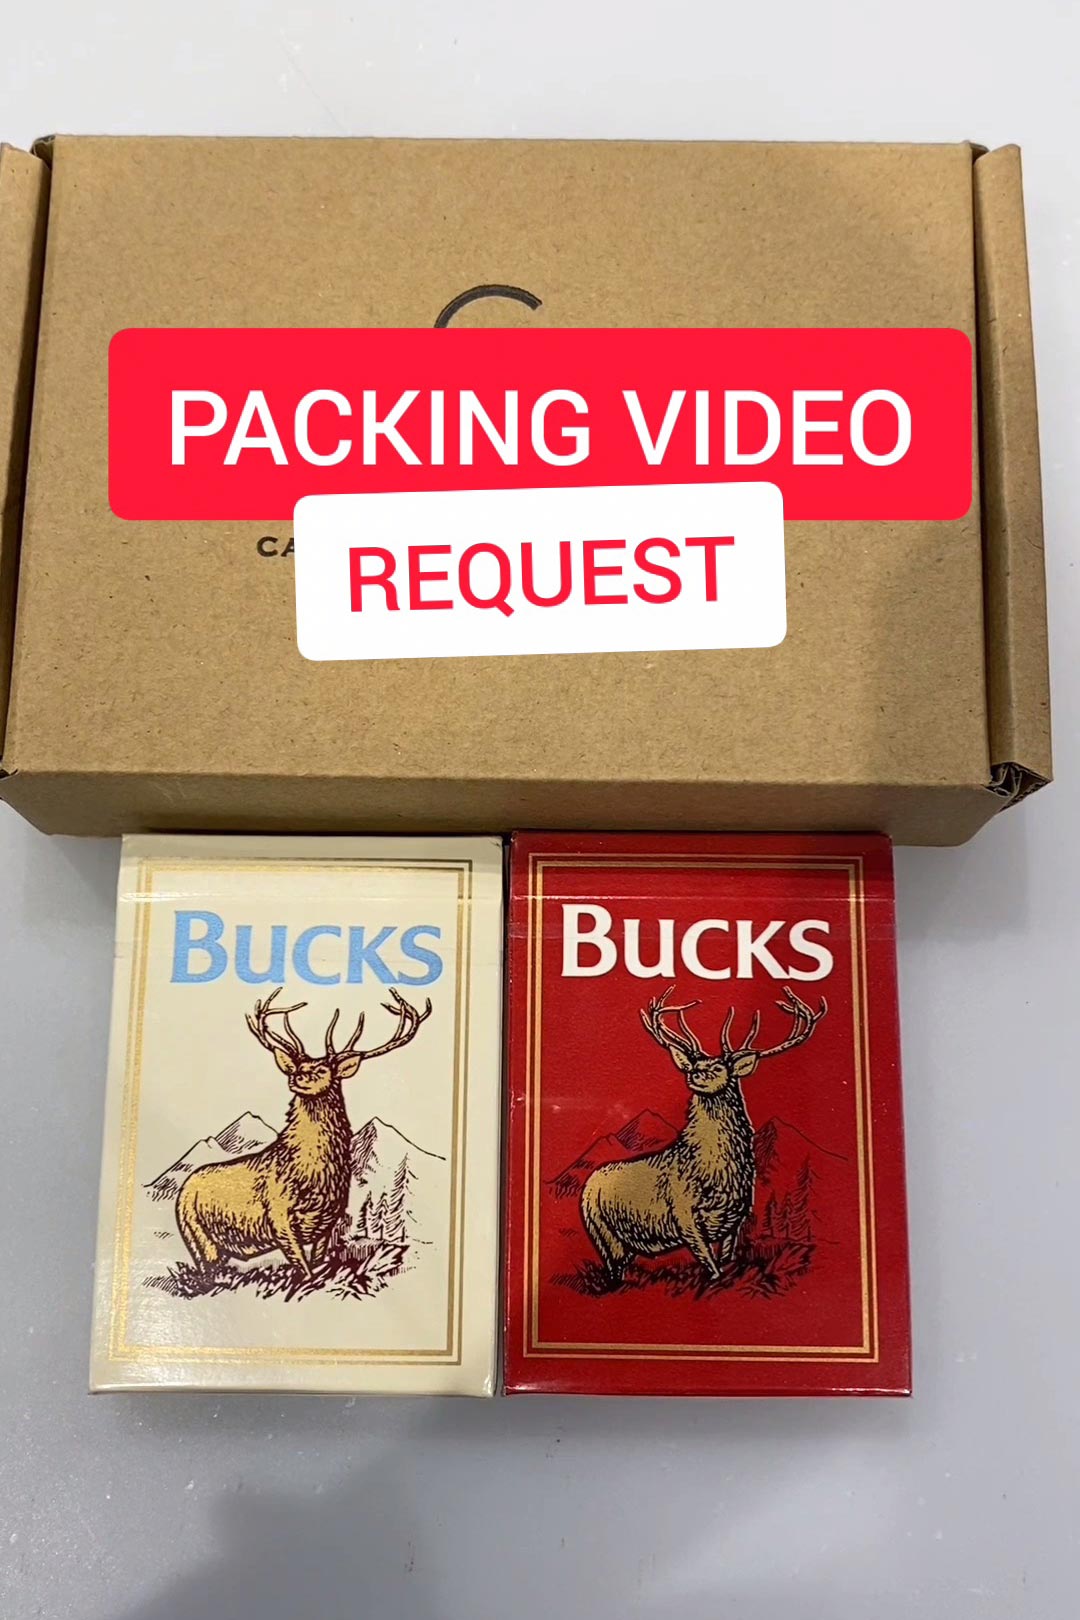 Packing Video Request!